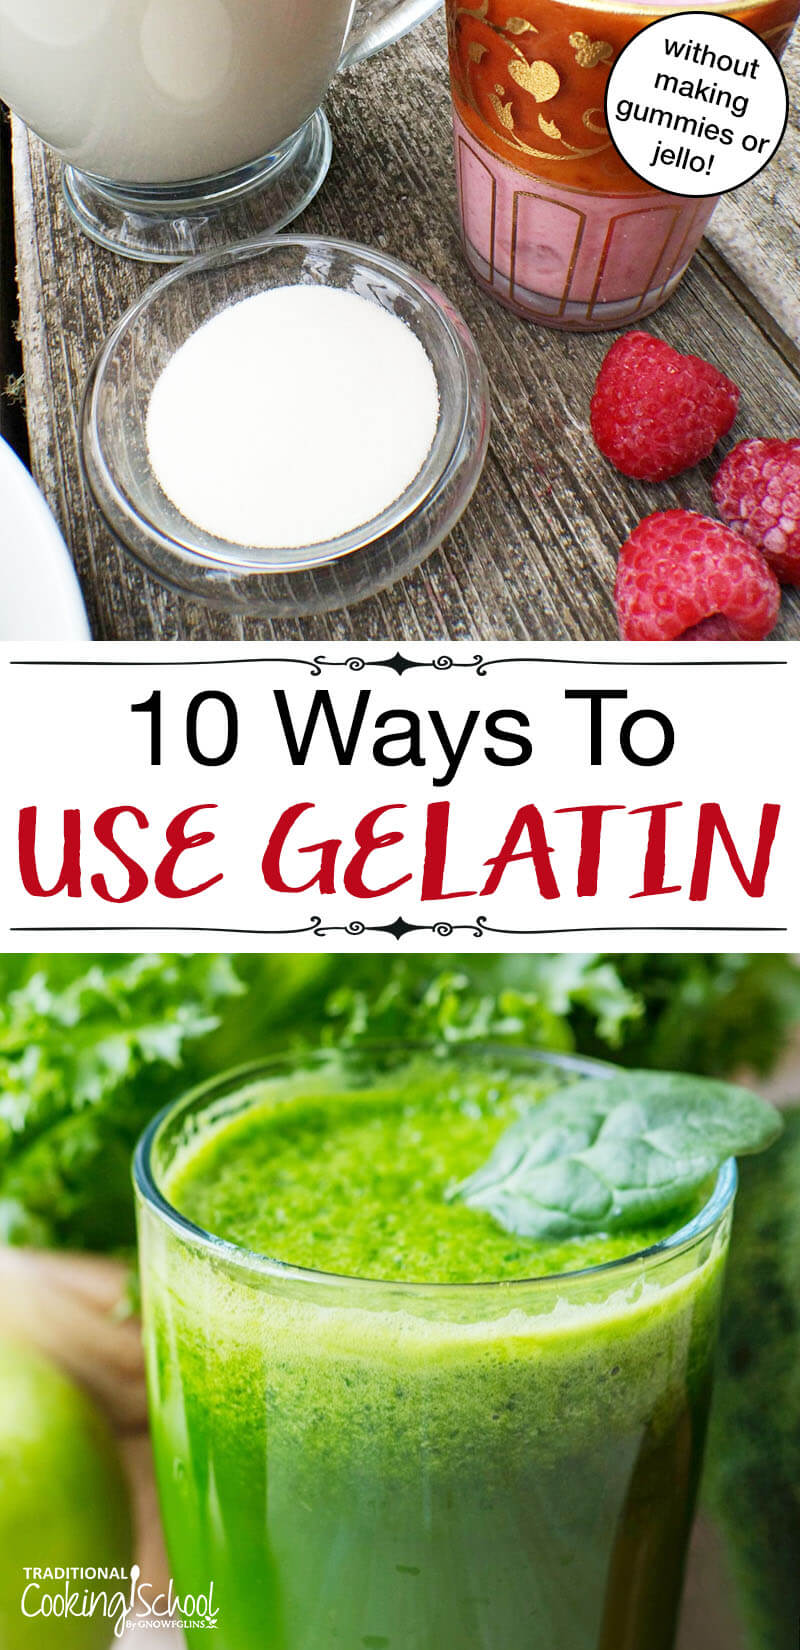 10 Ways to Use Gelatin without making gummies or jello. Gelatin has a profound role in nourishing and knitting together the human body which makes it a supplement worth consuming on a daily basis. Plus, it's very versatile. Here are recipes for how to incorporate it into 10 daily foods, none of which are fruit snacks, but plenty which are great for kids and will benefit your health, beauty and energy. #gelatin #collagen #beauty #recipes #health #greatlakes